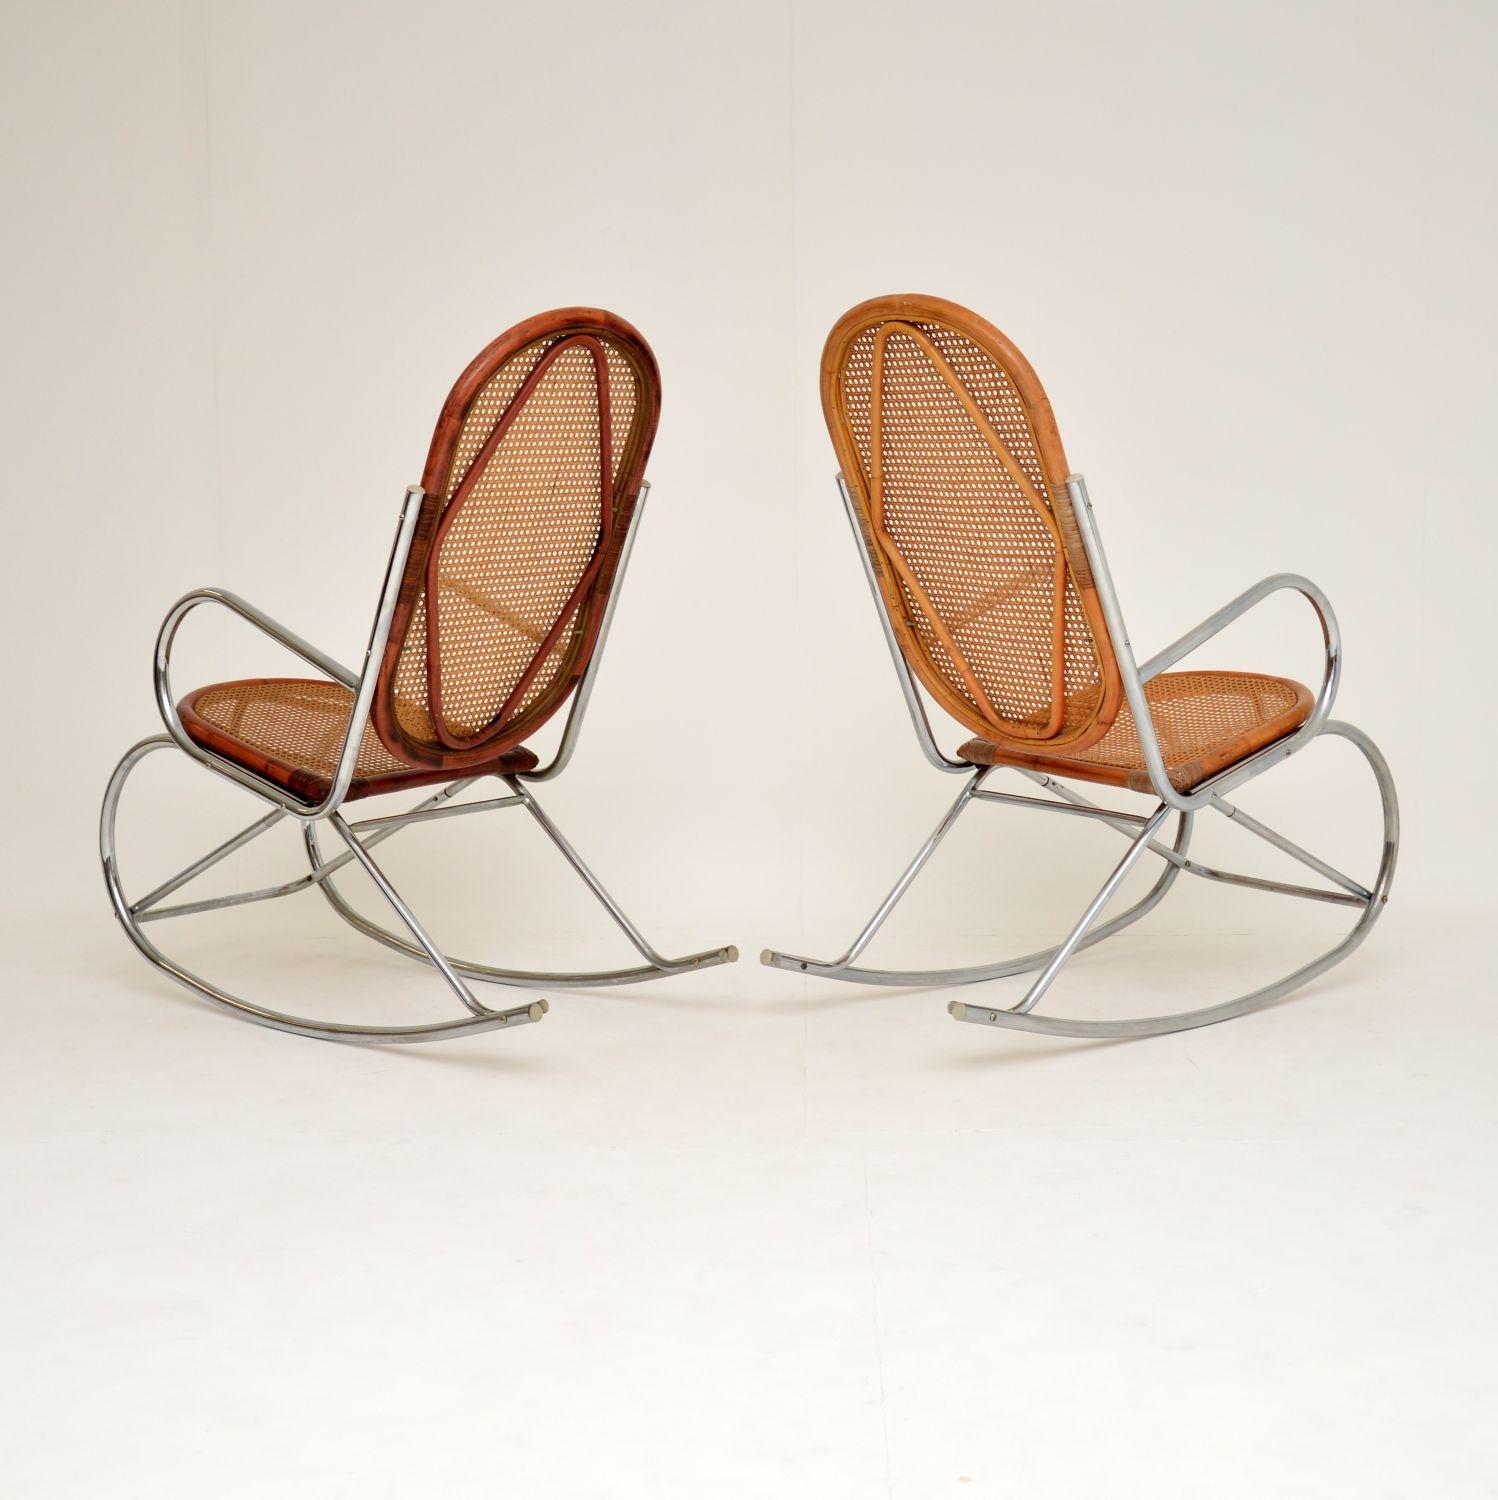 1970s Pair of Retro Chrome and Bamboo Rocking Chairs 7